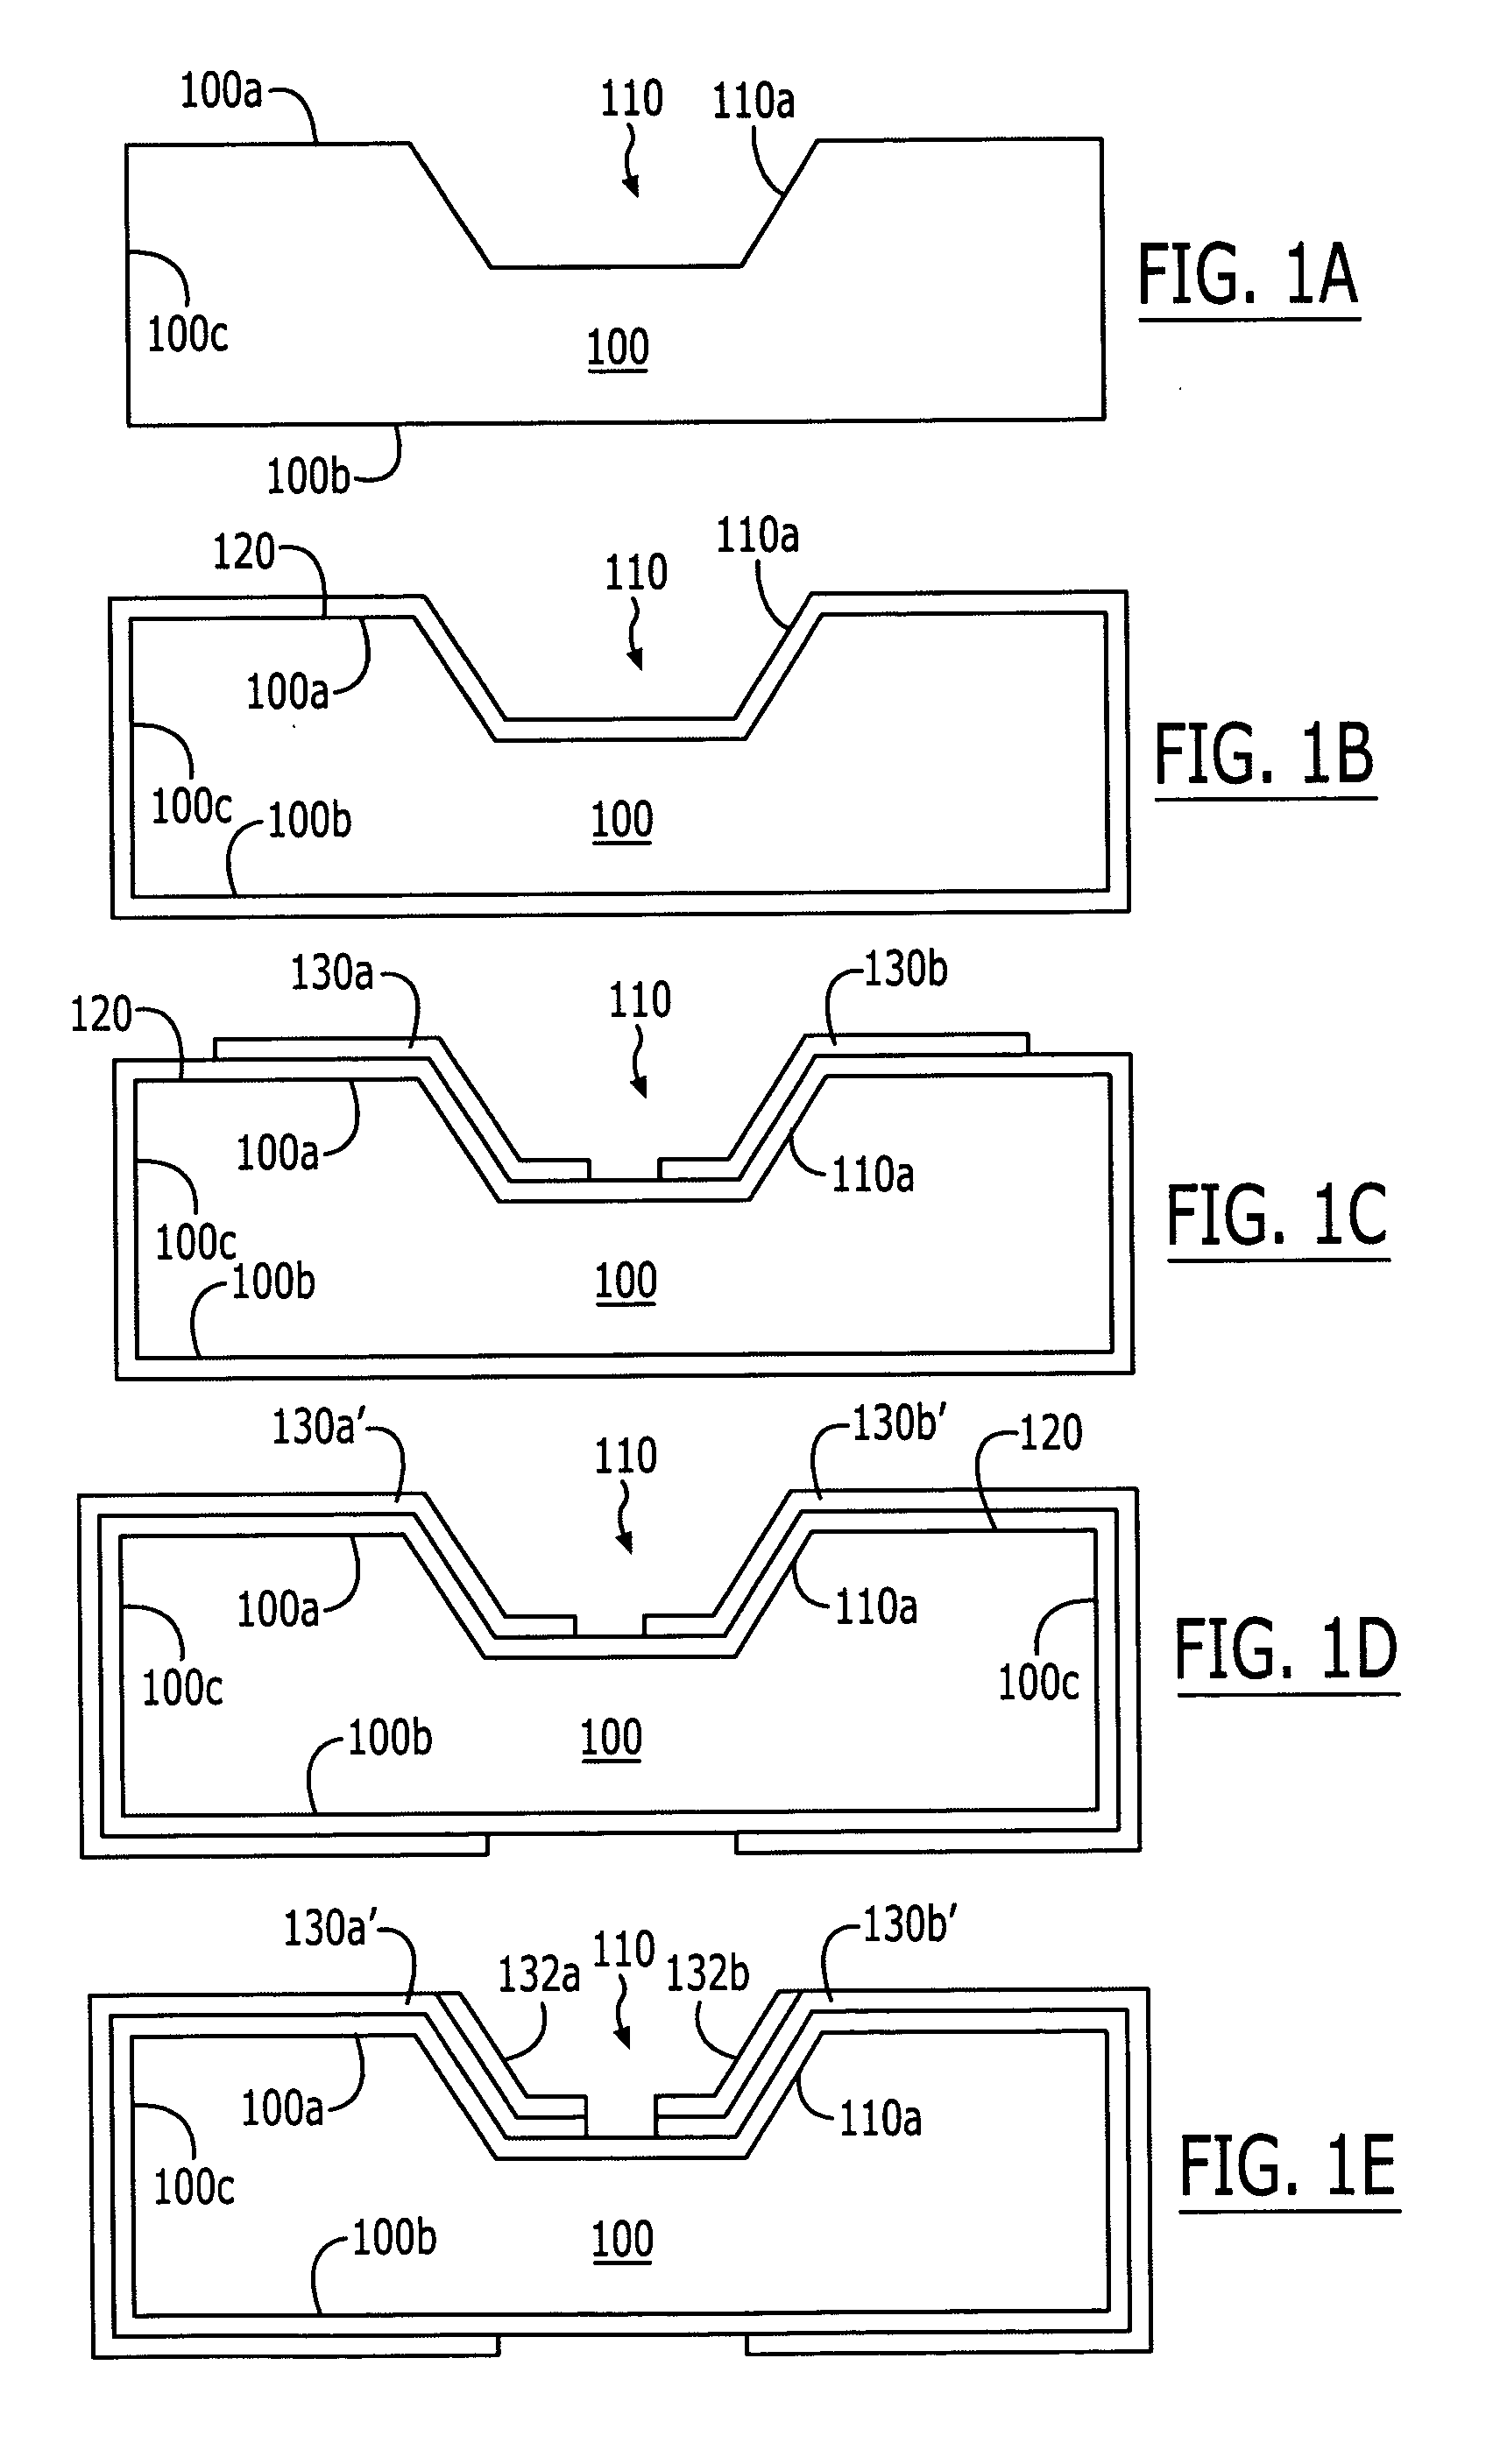 Solid metal block mounting substrates for semiconductor light emitting devices, and oxidizing methods for fabricating same